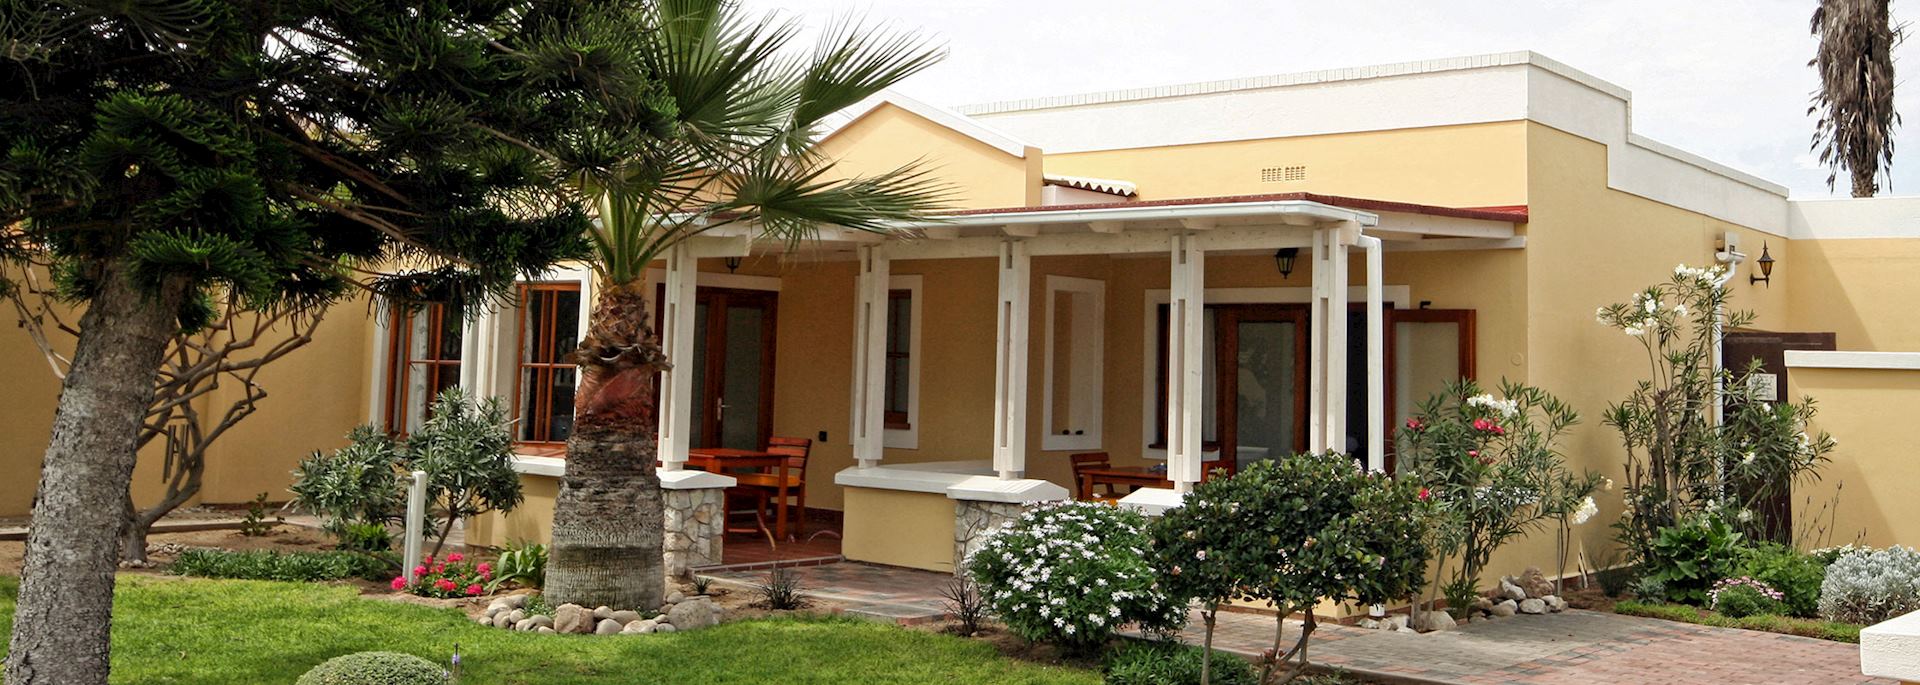 Cornerstone Guesthouse, Namibia